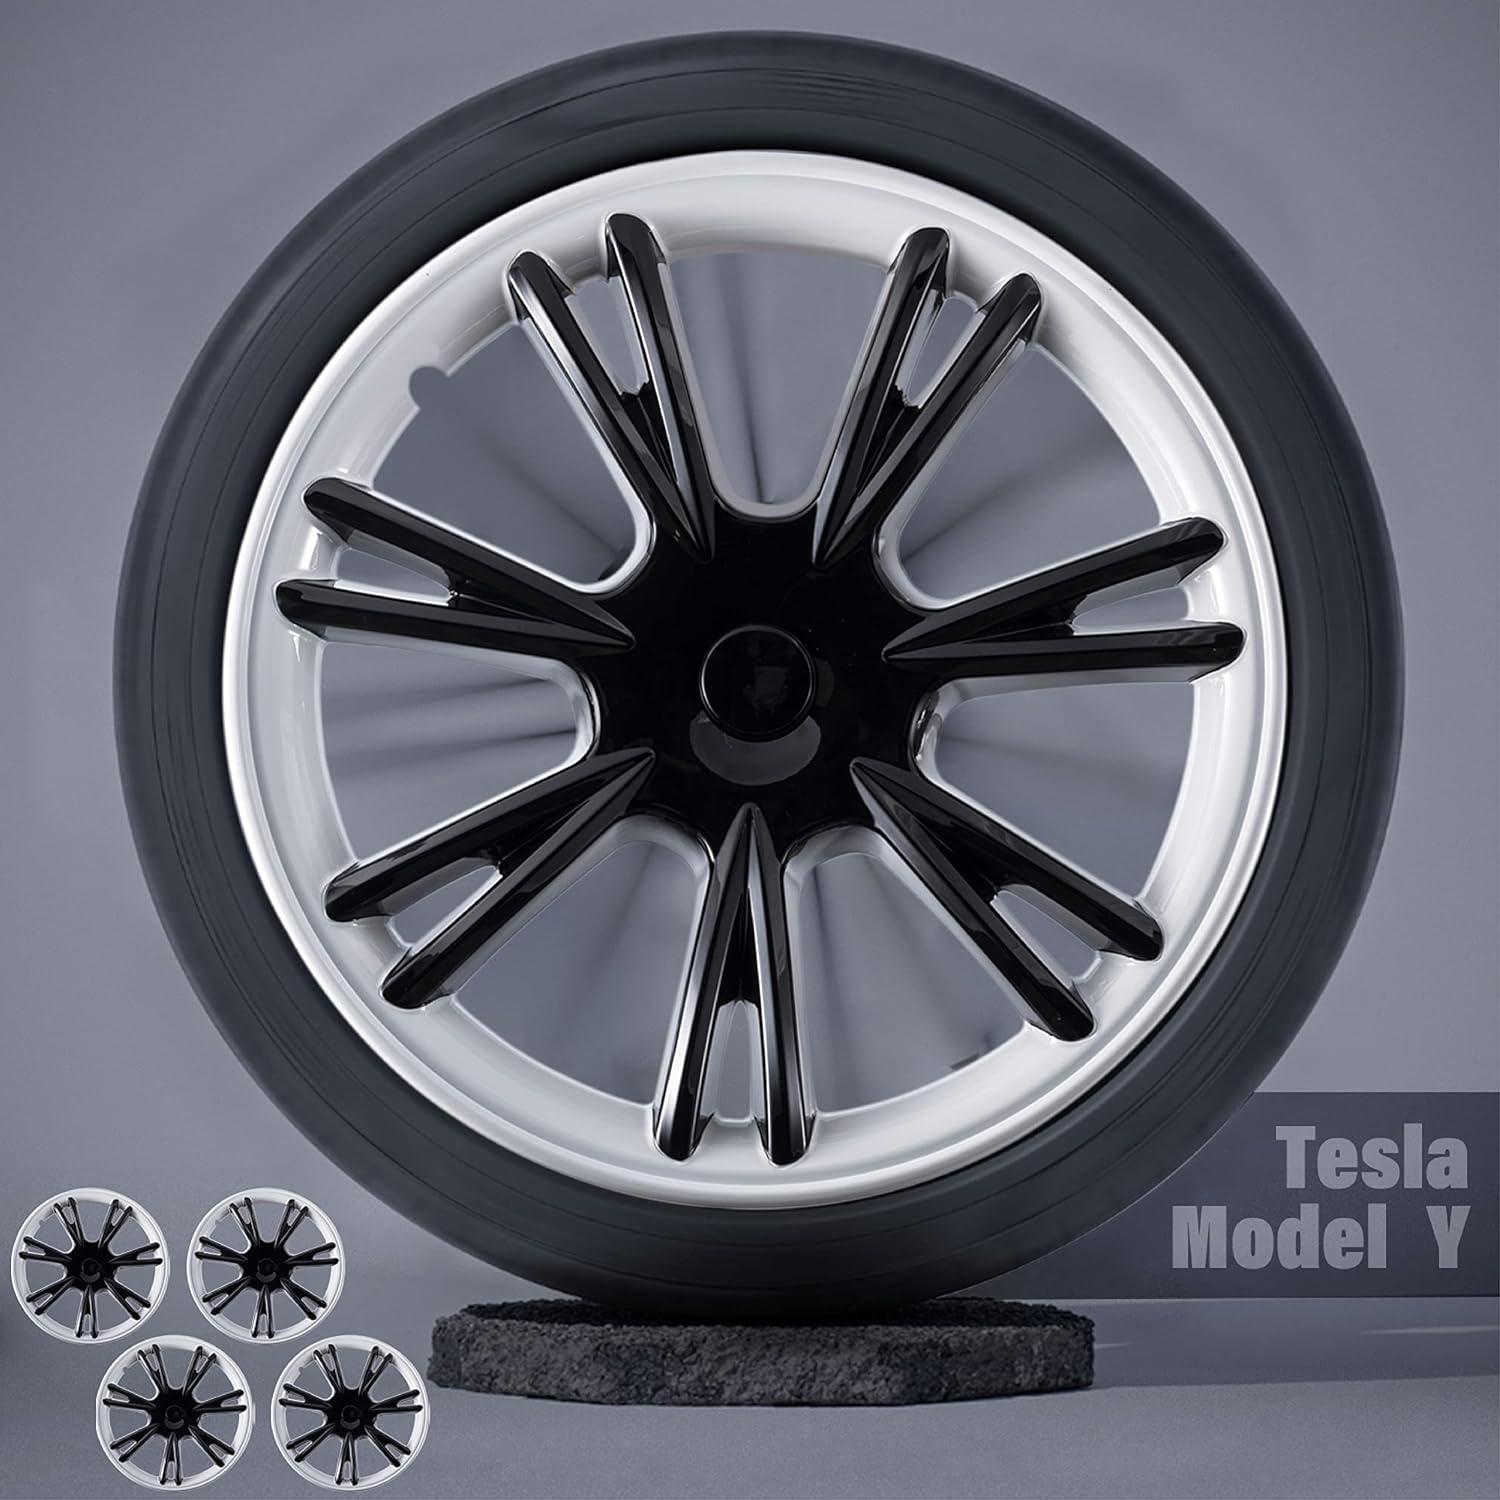 Enhance your Tesla Model Y with 19-inch wheel covers!